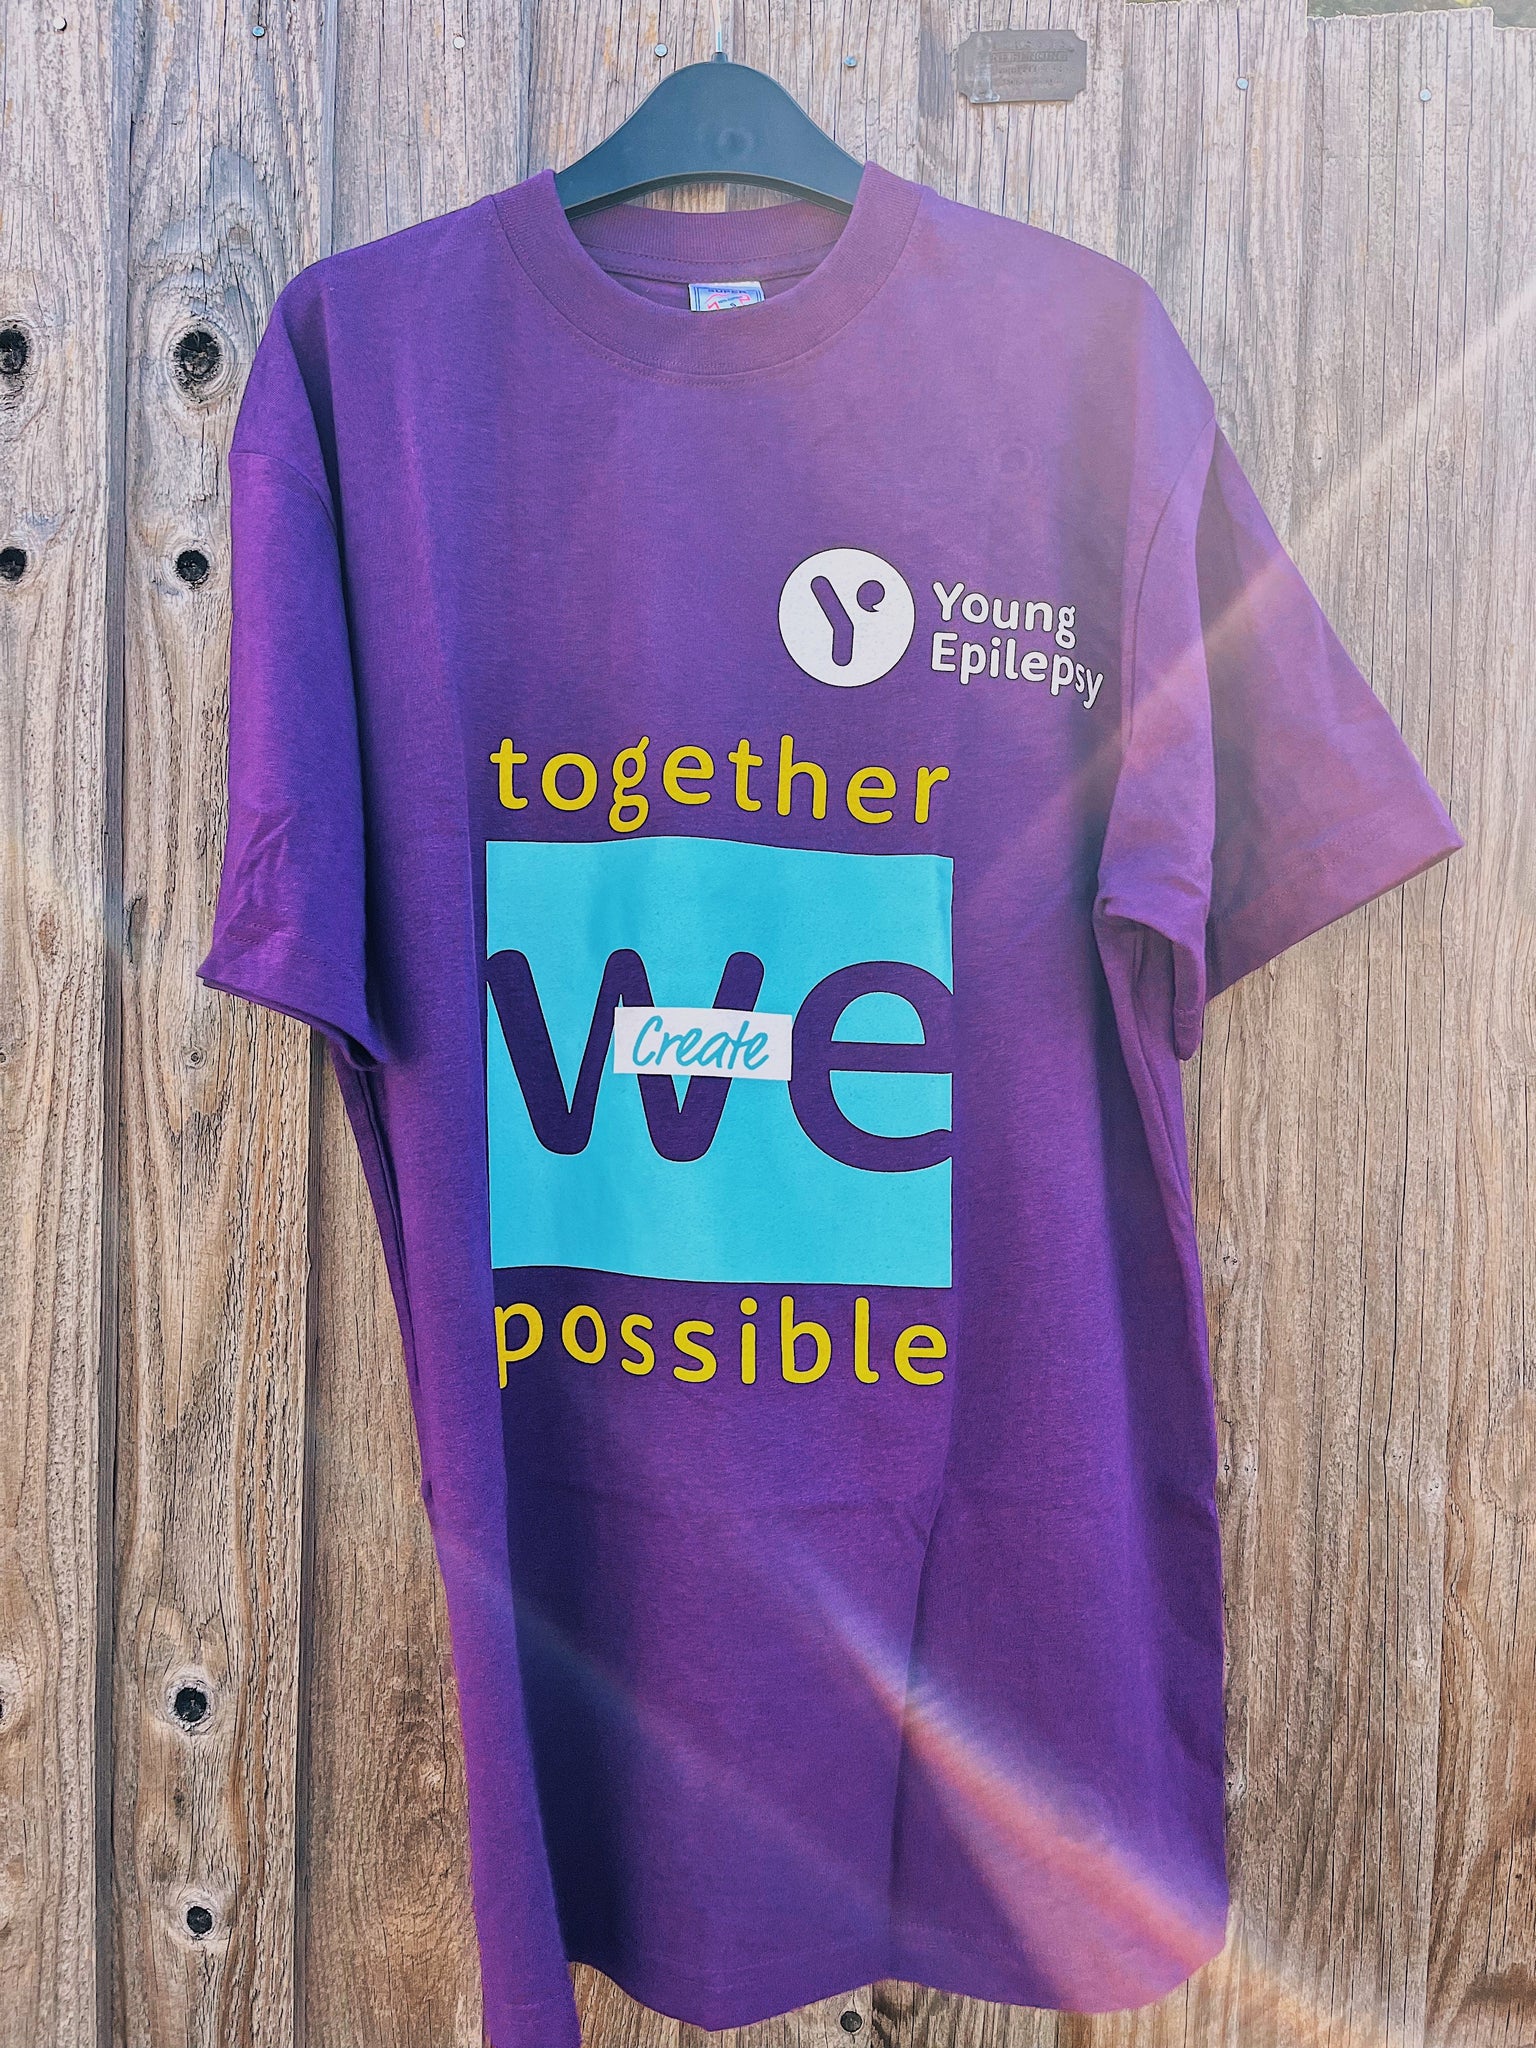 *NEW* Short Sleeve - Young Epilepsy Adult T-Shirt